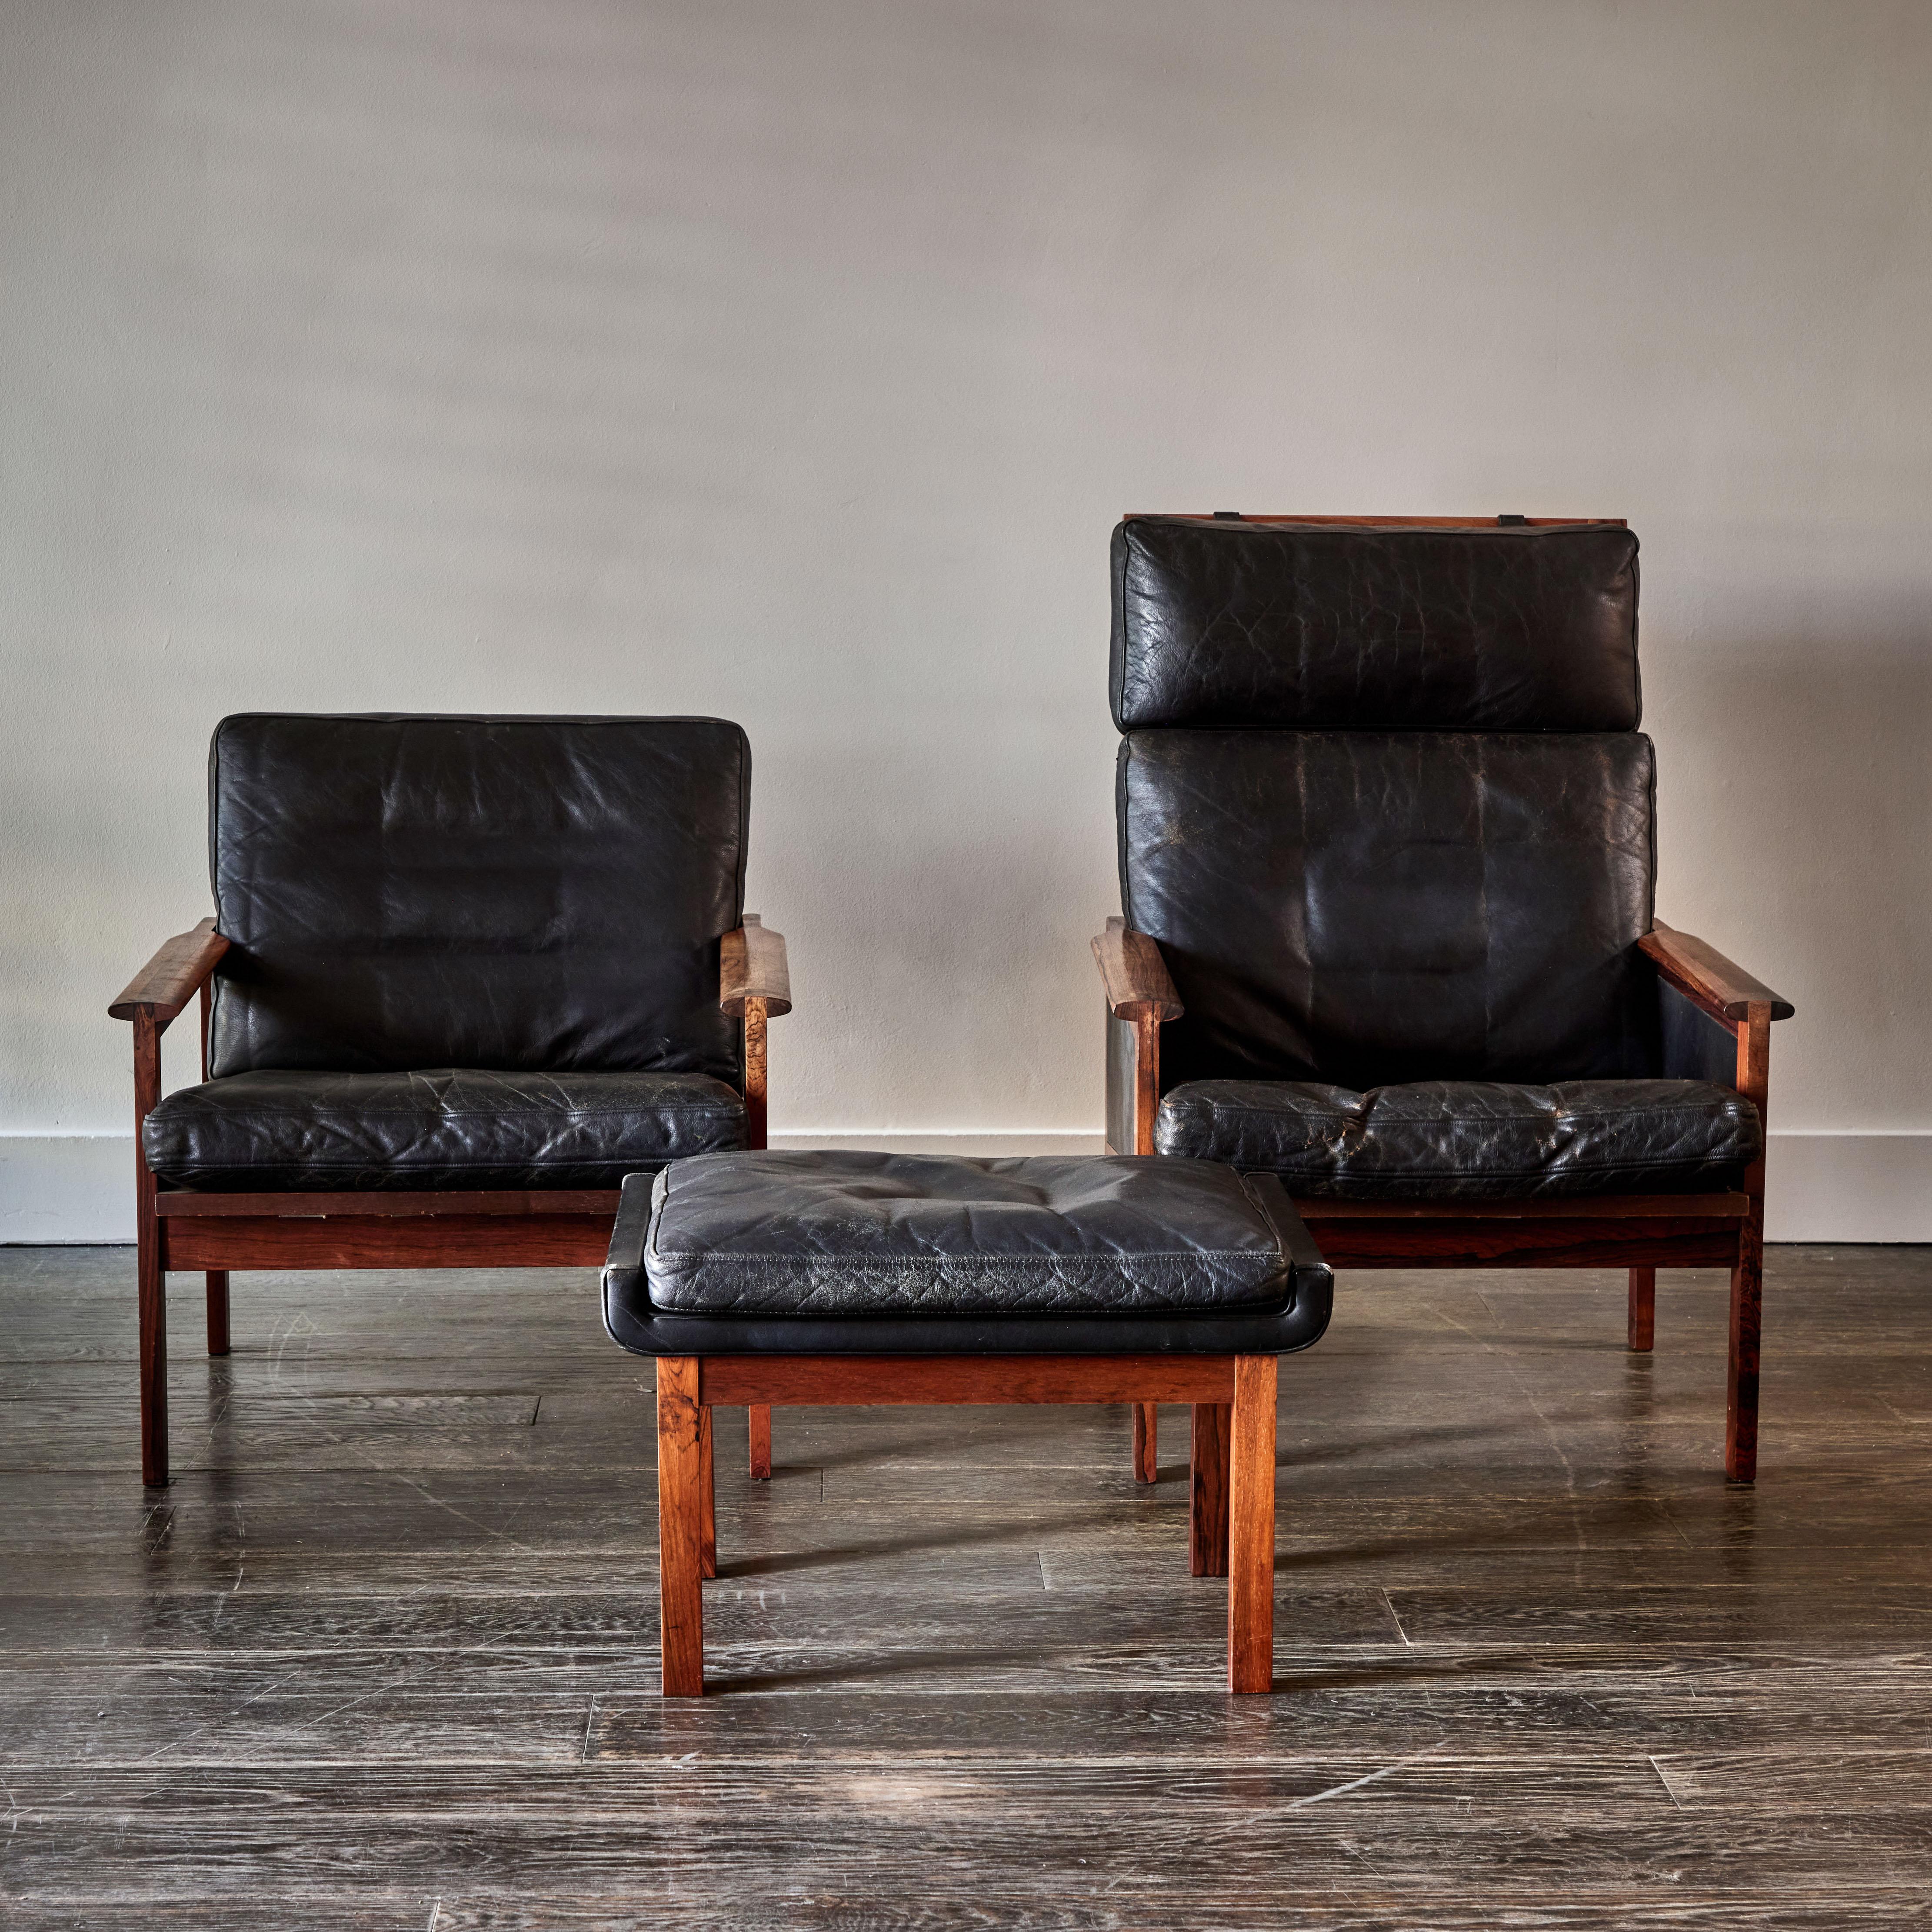 Suite of two black leather and wood Danish mid-century chairs and ottoman. Sexy and relaxed, and with excellent lines, the strong, geometric framework contrasts beautifully with the comfortable leather upholstery. 

Denmark, circa